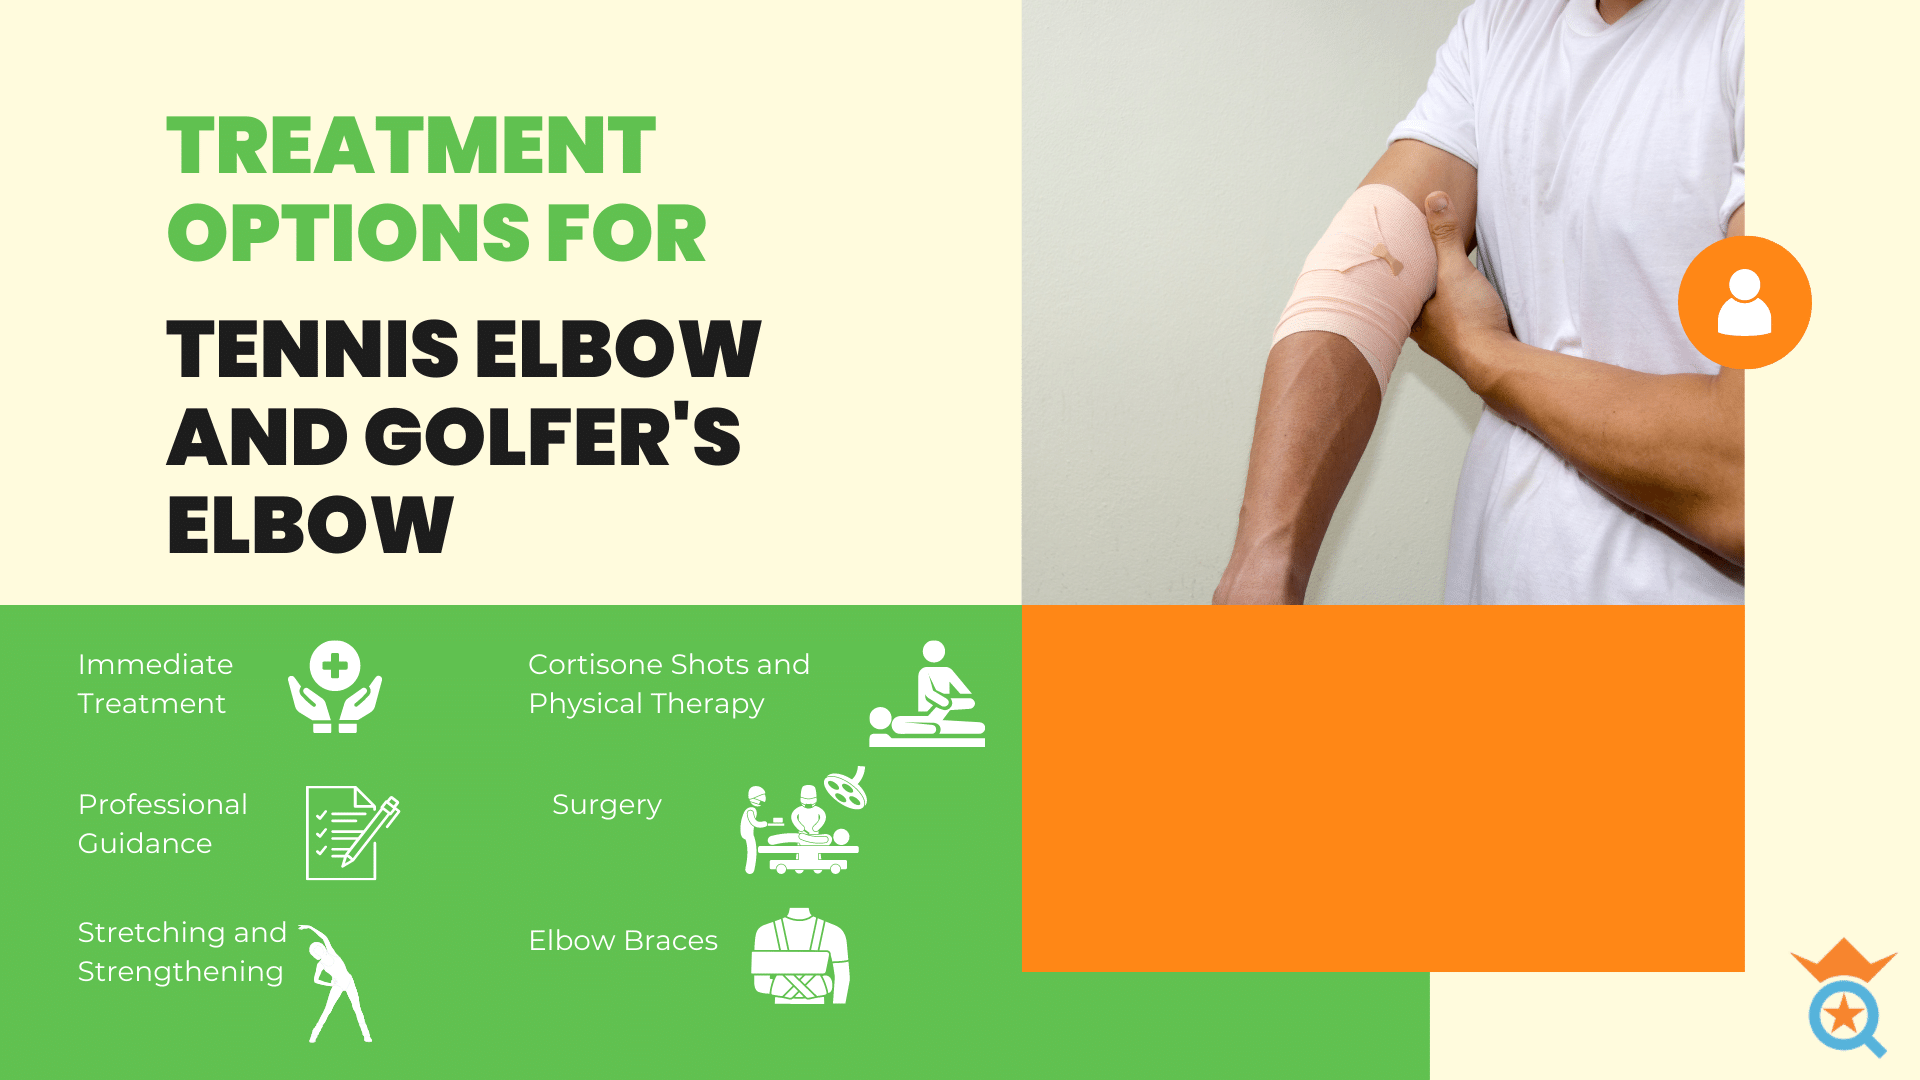 Treatment Options for Tennis Elbow and Golfer's Elbow